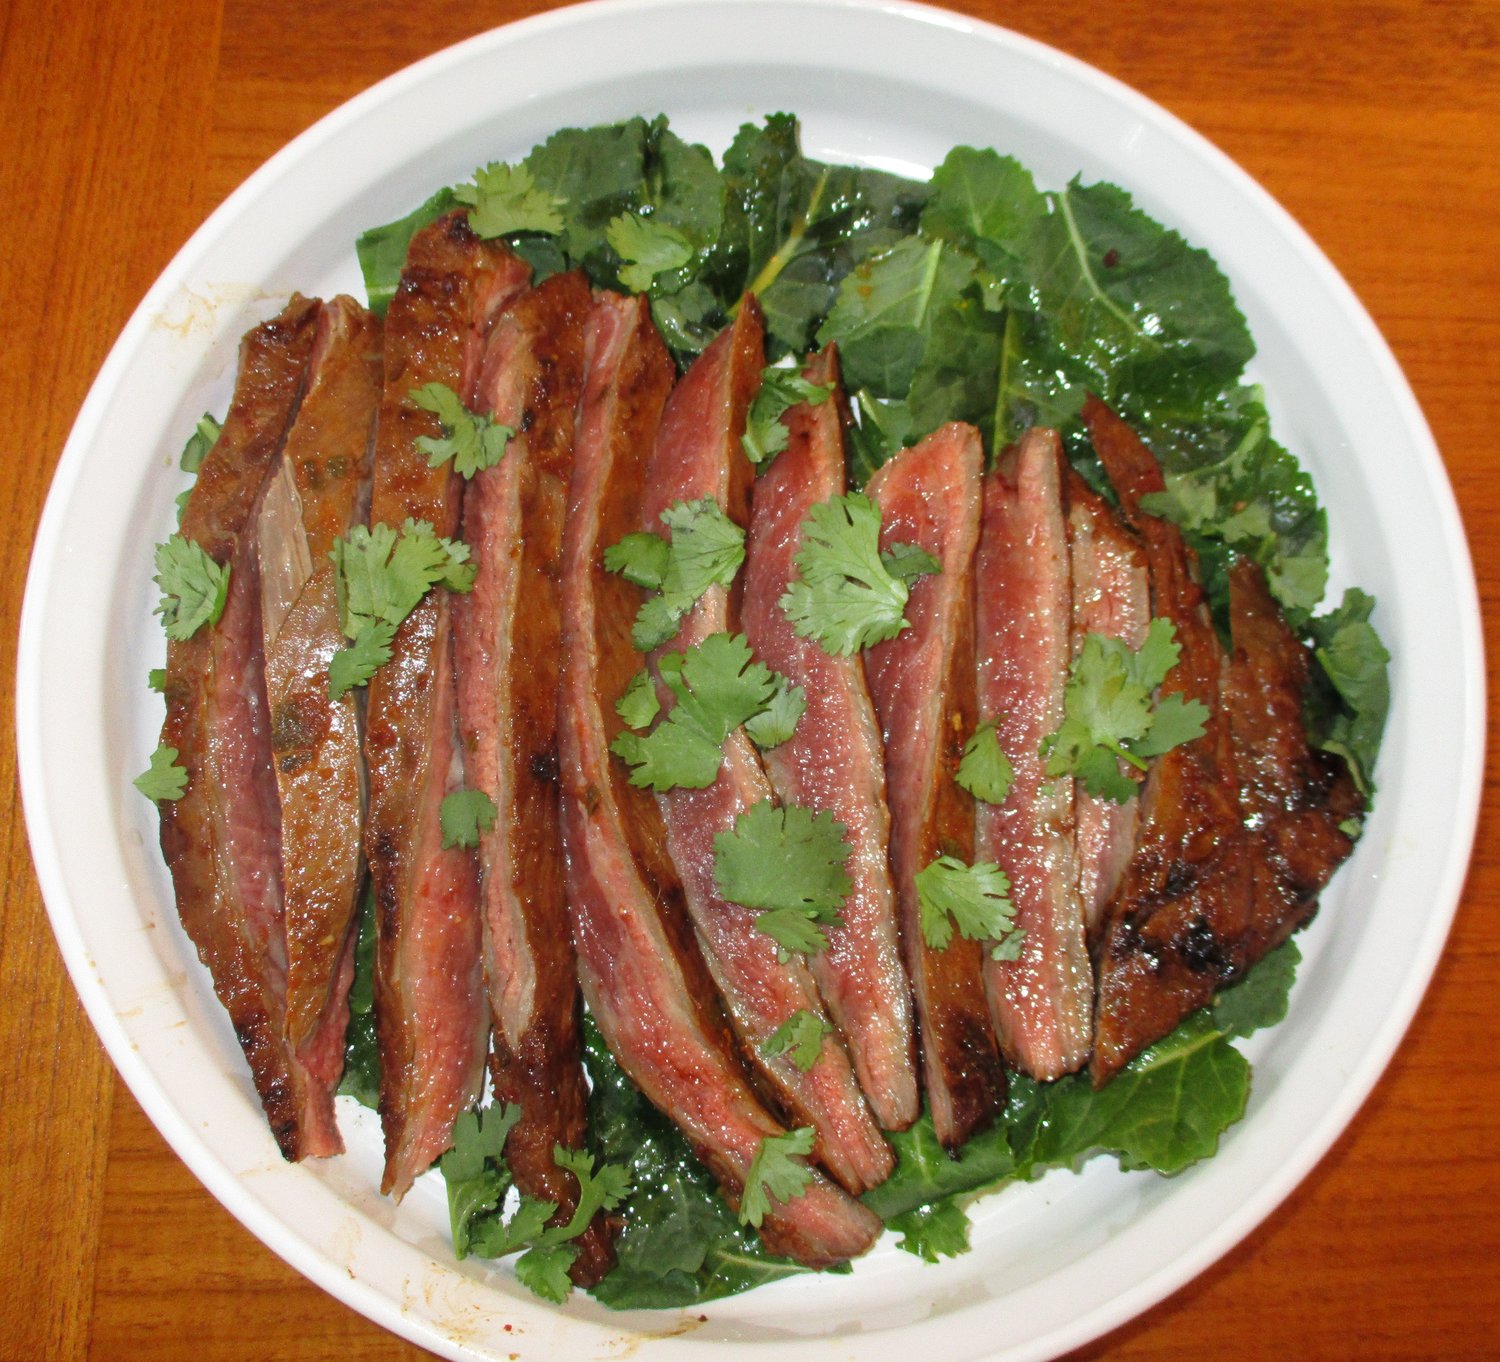 Arrachera served on a bed of baby kale and garnished with cilantro.